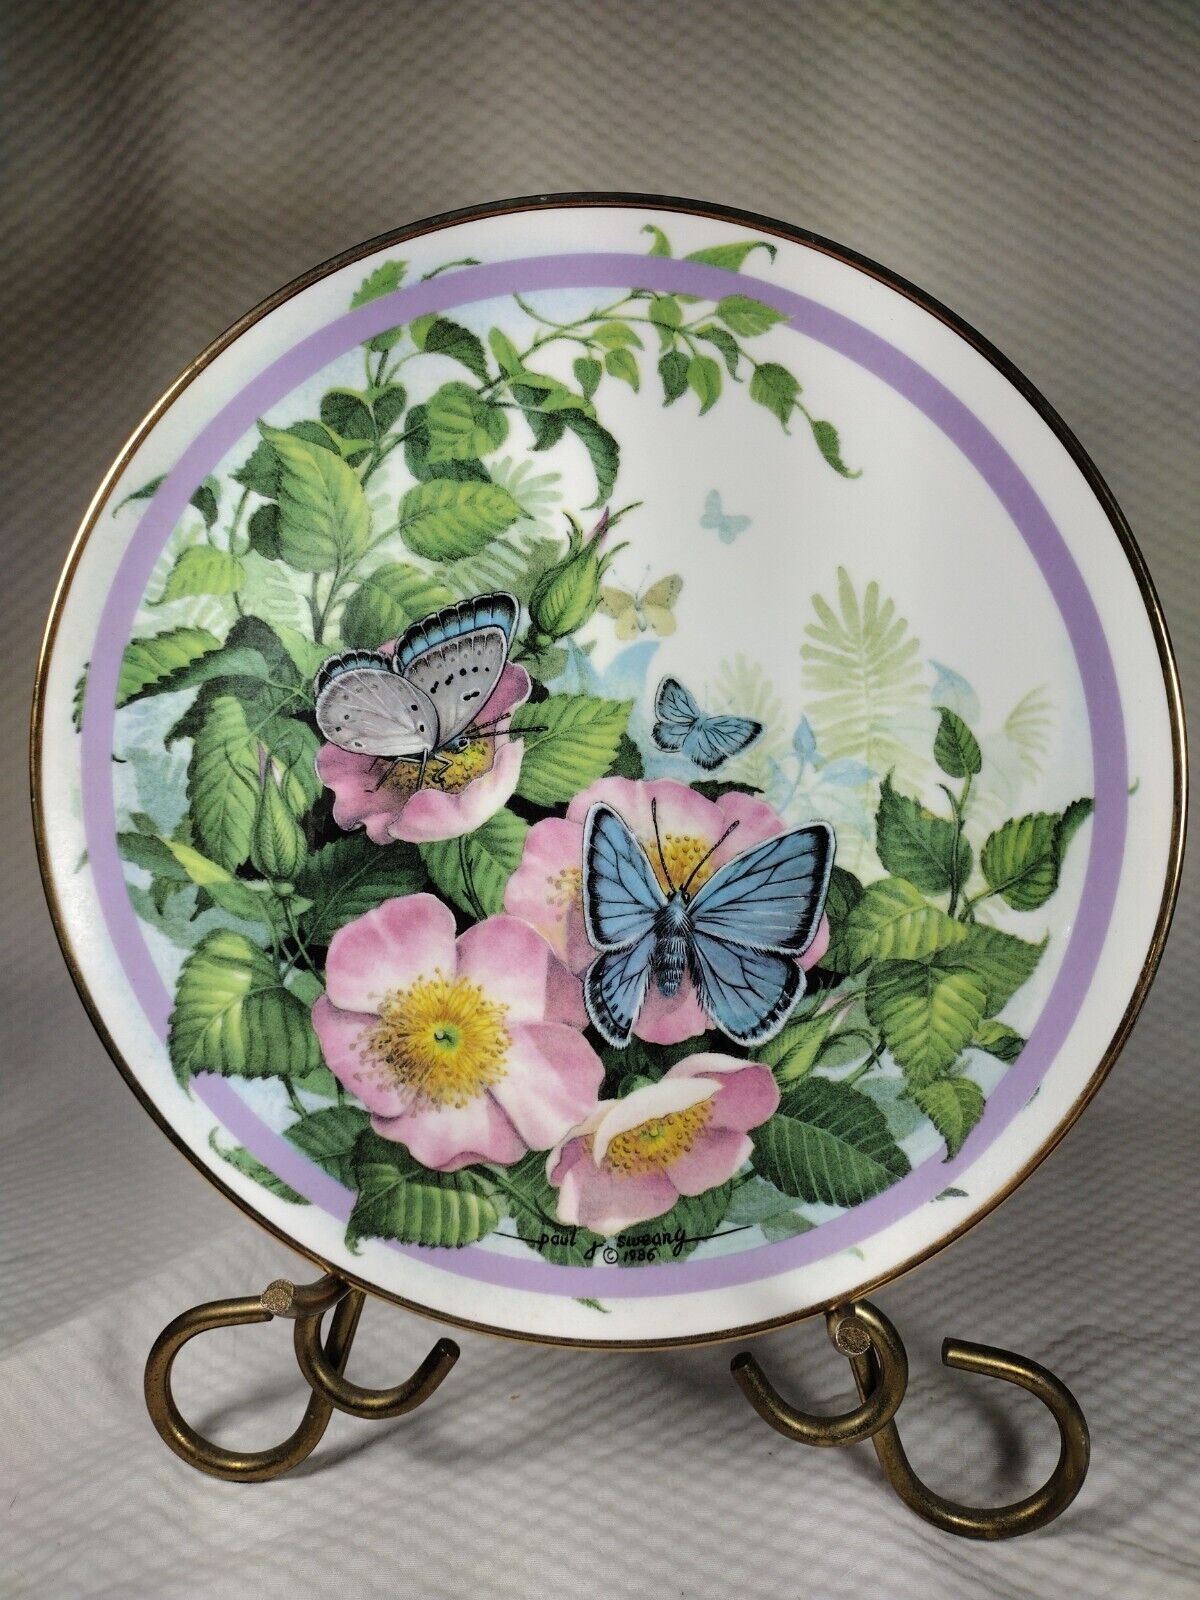 Hamilton Collection Butterfly Garden Plate Common Blue 1986 Paul sweany 1983B